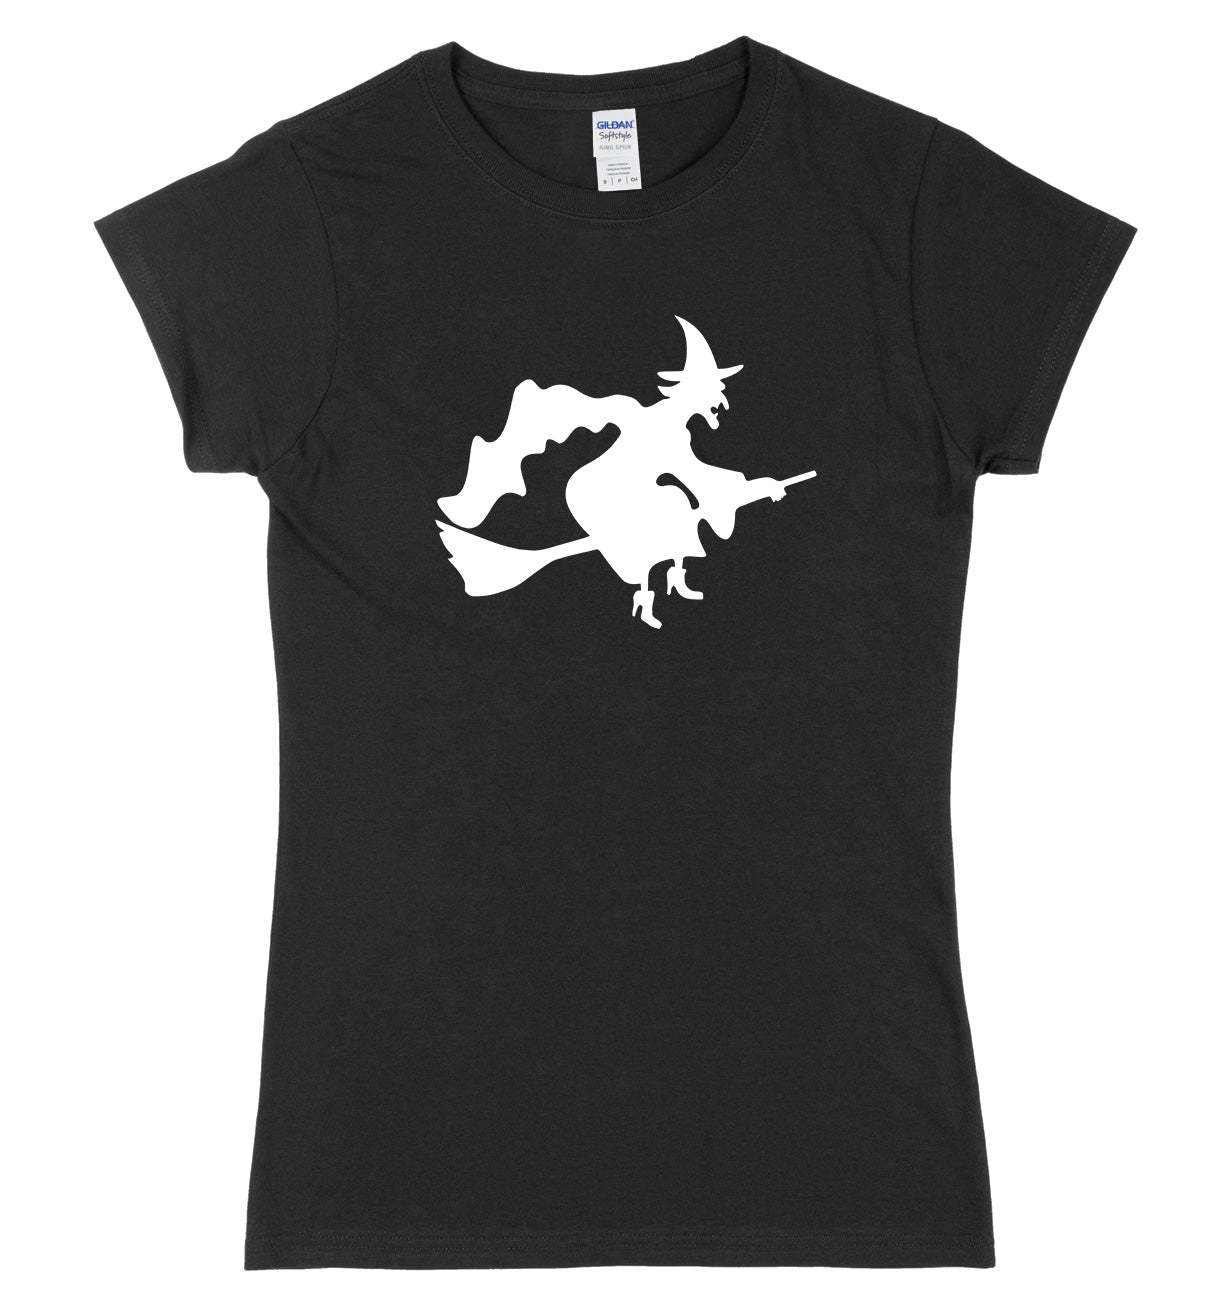 Witch Flying A Broomstick Design Womens Ladies Slim Fit Halloween T-Shirt